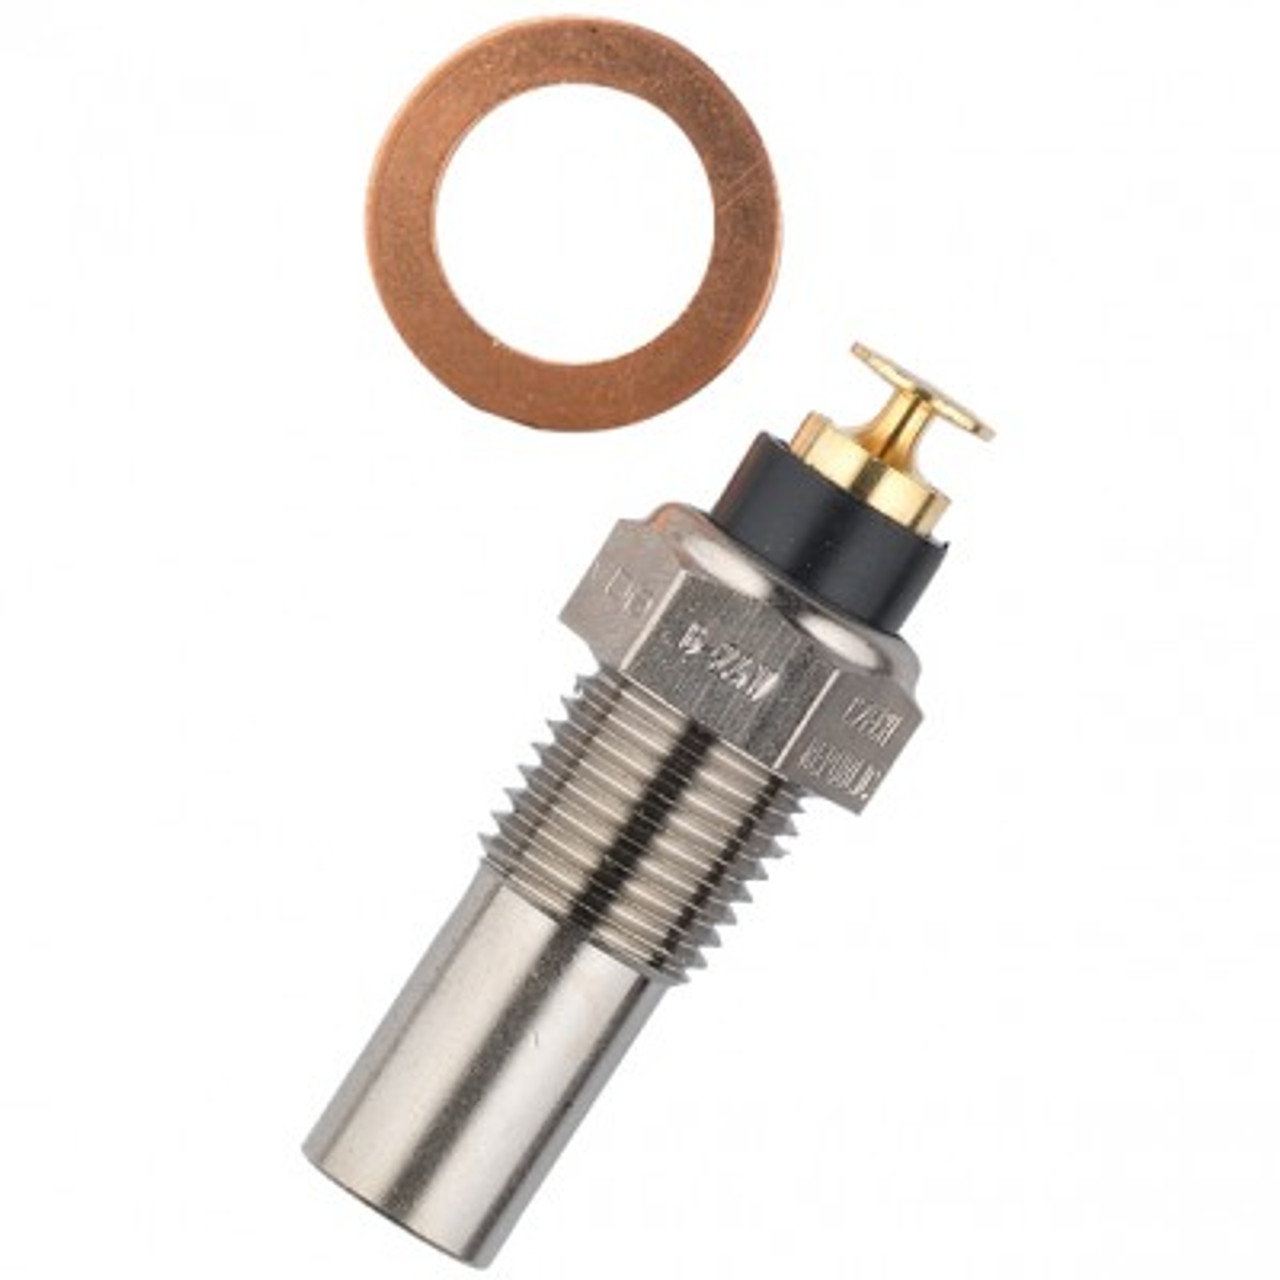 VDO Temperature Sender 300 Degrees F/ 150 C, Part Number #323-423, 10x1.0 Metric Thread. 

Single Station (for one gauge), Standard Ground. For use with VDO or other Mfgs. 10-180 Ohm Range Gauges. 

List Price: $31.00

INSTALL NOTE: Sender Threads are Self-Sealing. Use of Sealing Compounds Will Affect Sender Output.
          Can't Find What You are looking for... Contact our Technical Support Staff!